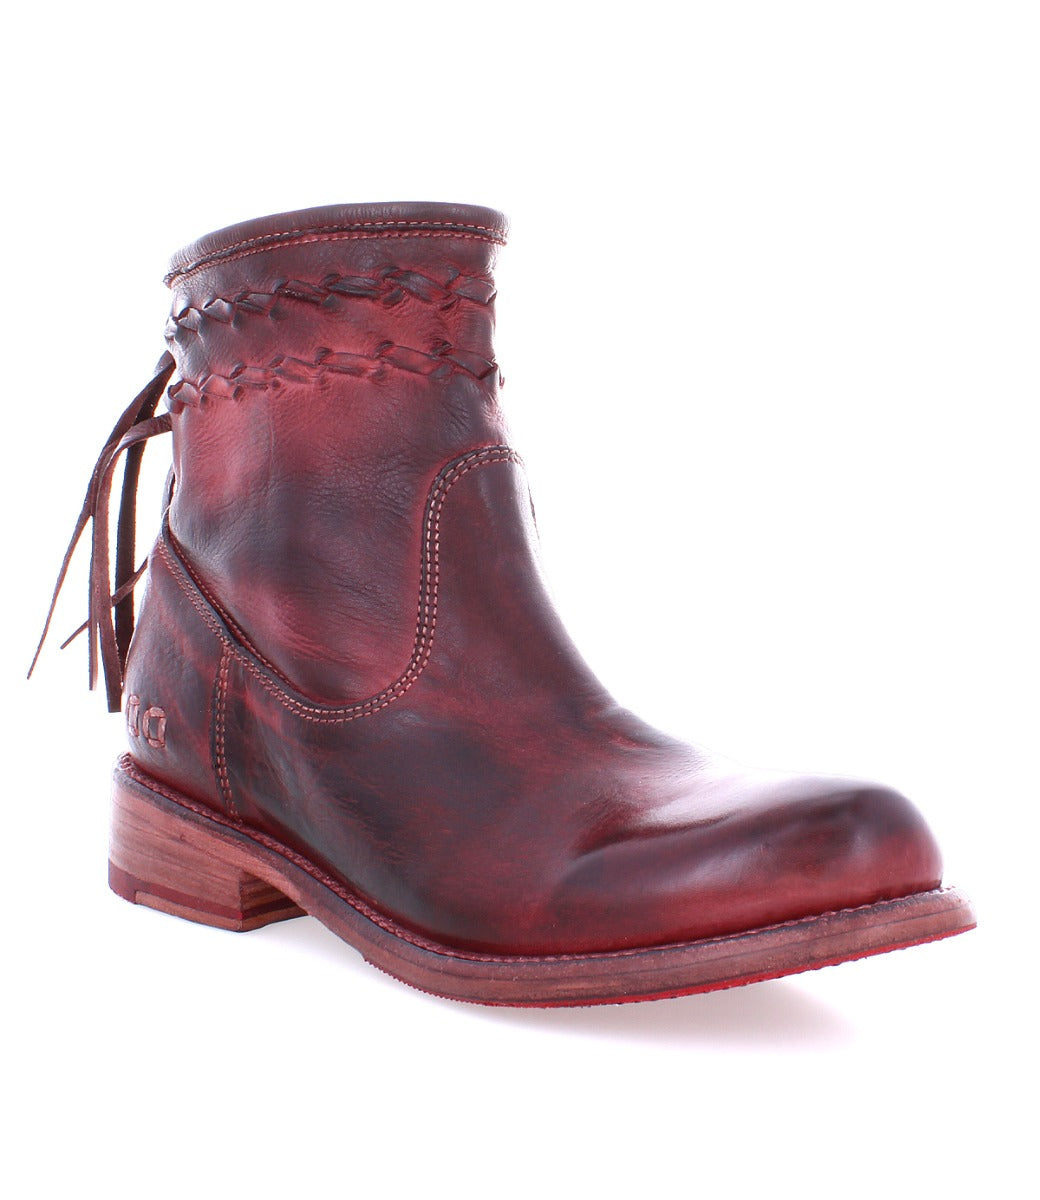 A women's red leather Craven ankle boot by Bed Stu.